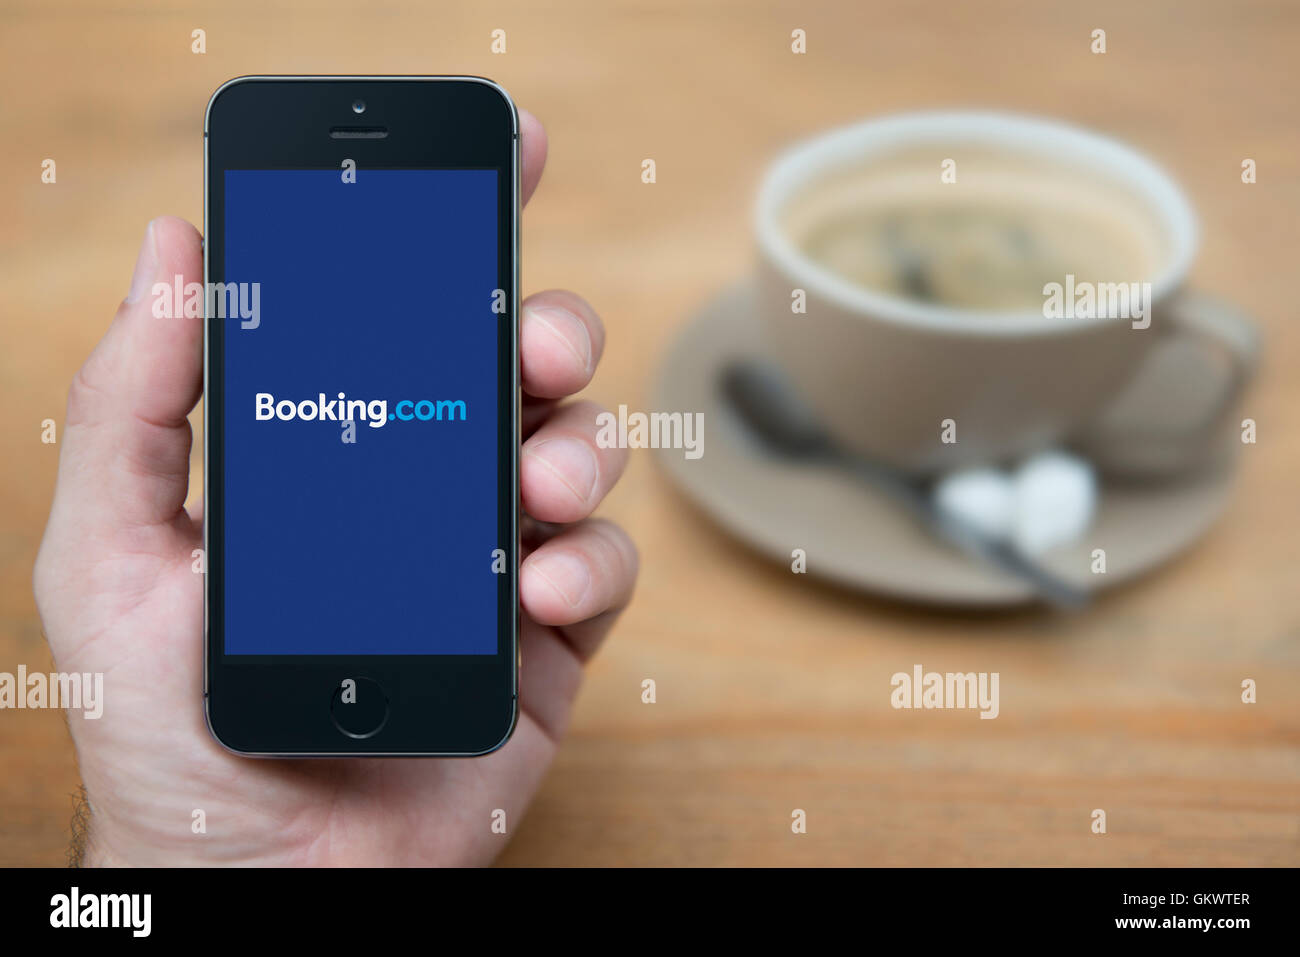 A man looks at his iPhone which displays the Booking.com logo, while sat with a cup of coffee (Editorial use only). Stock Photo